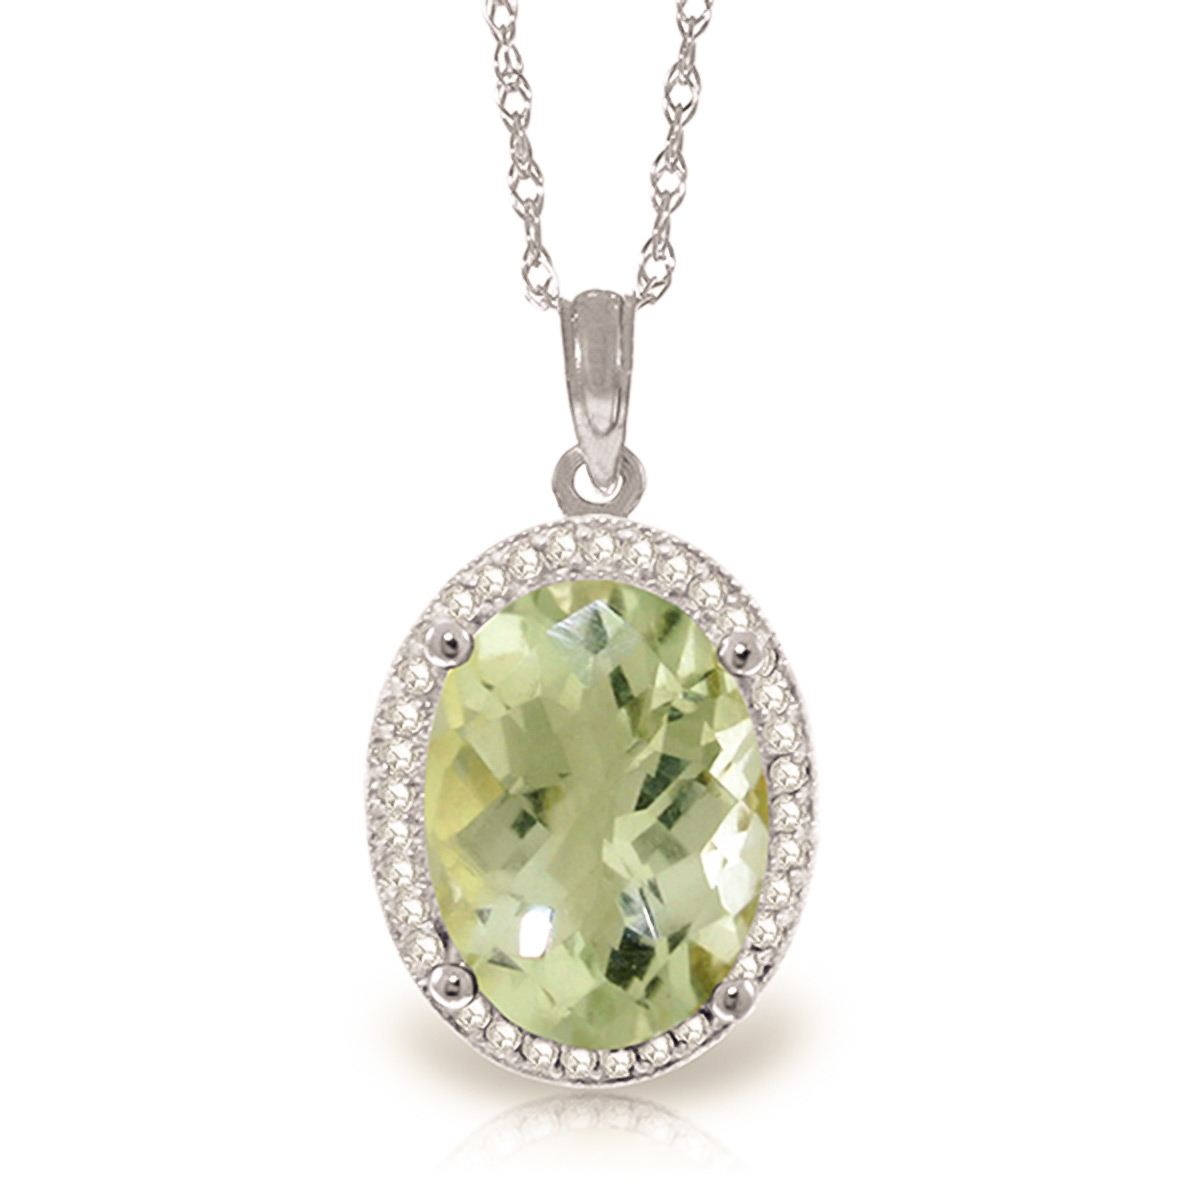 Green Amethyst Halo Pendant Necklace 5.08 ctw in 9ct White Gold